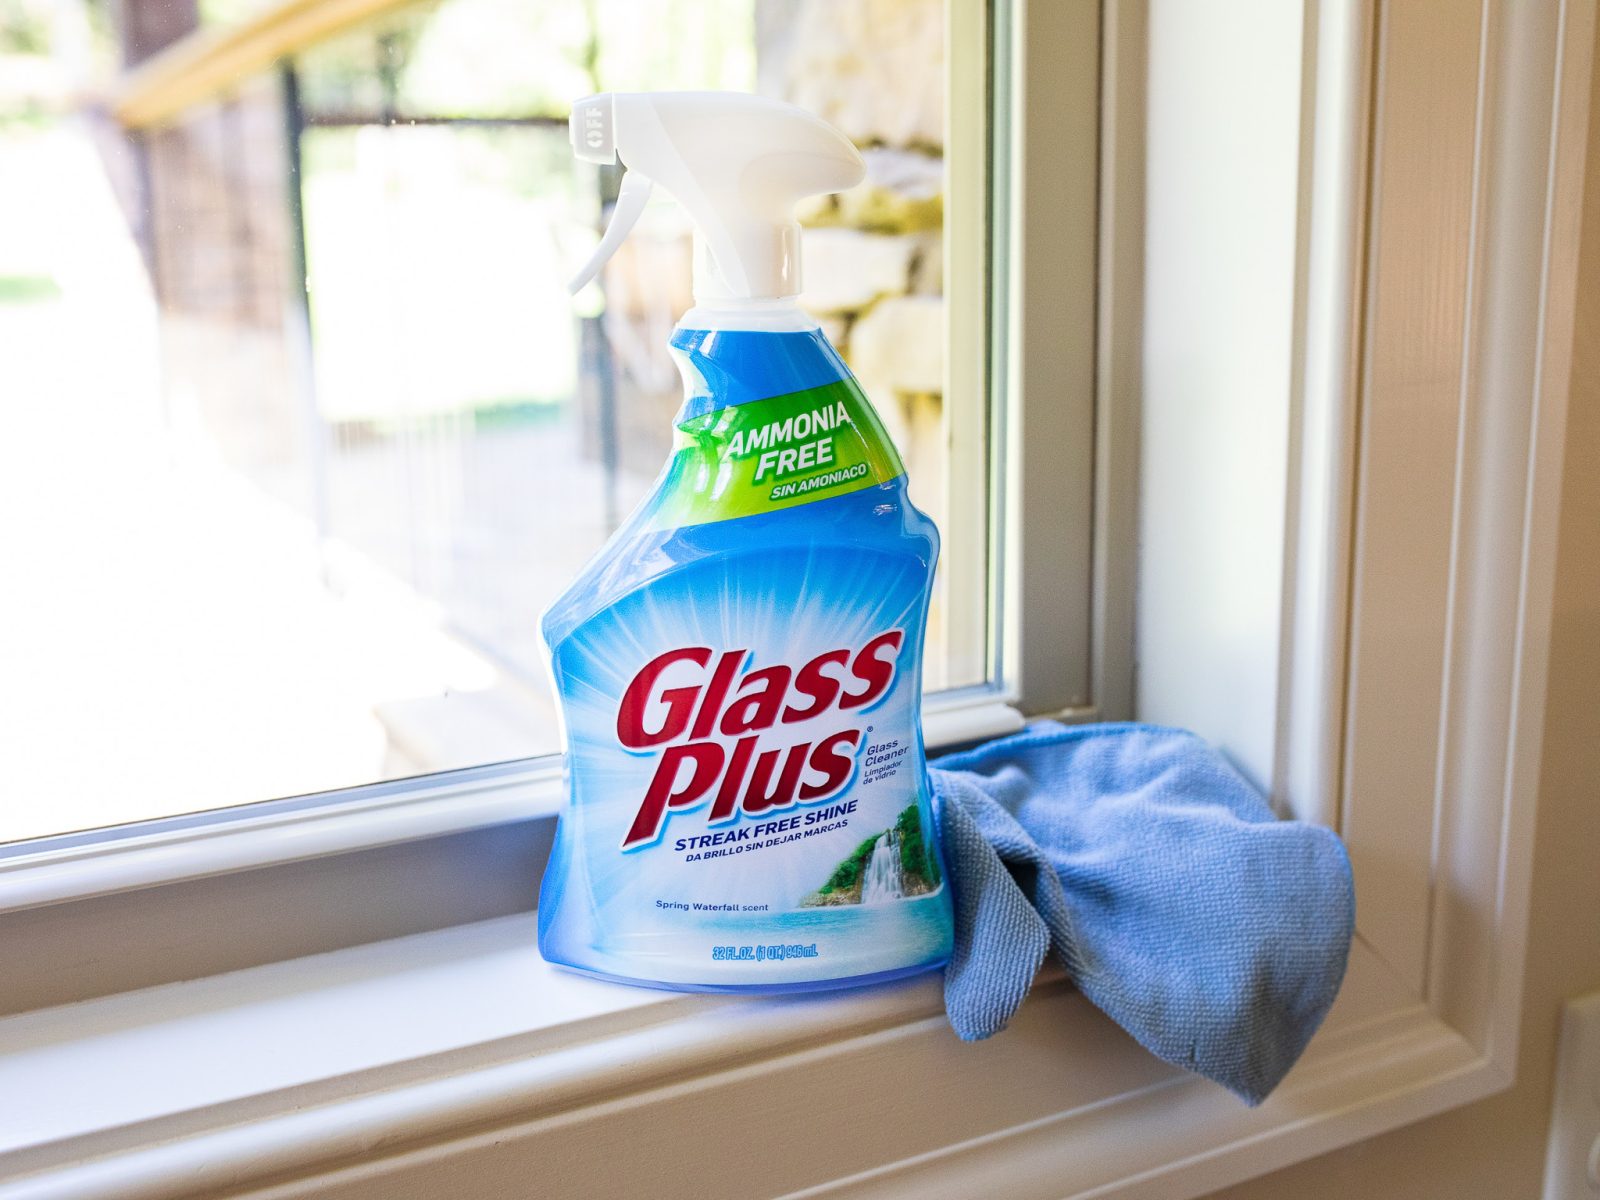 Get Glass Plus For Just 79¢ At Kroger